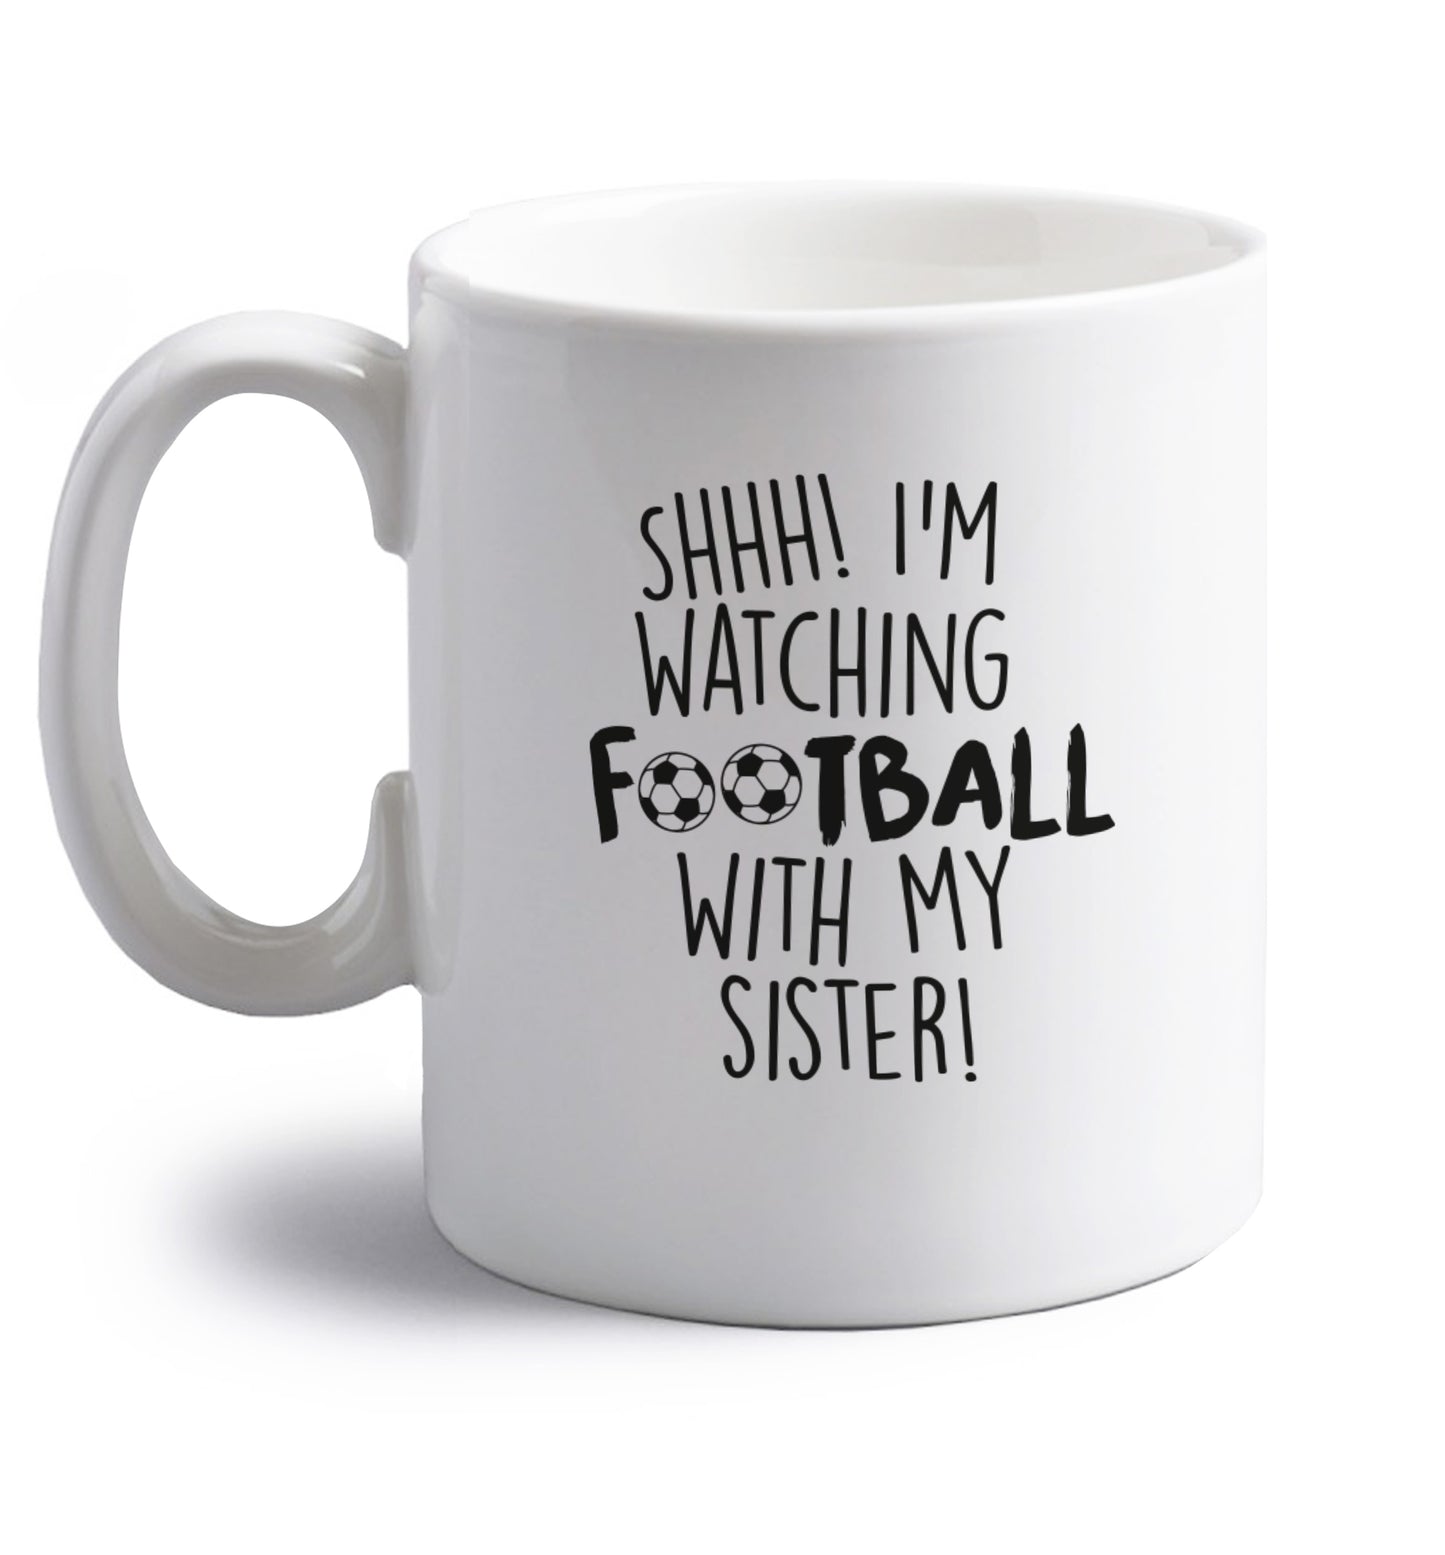 Shhh I'm watching football with my sister right handed white ceramic mug 